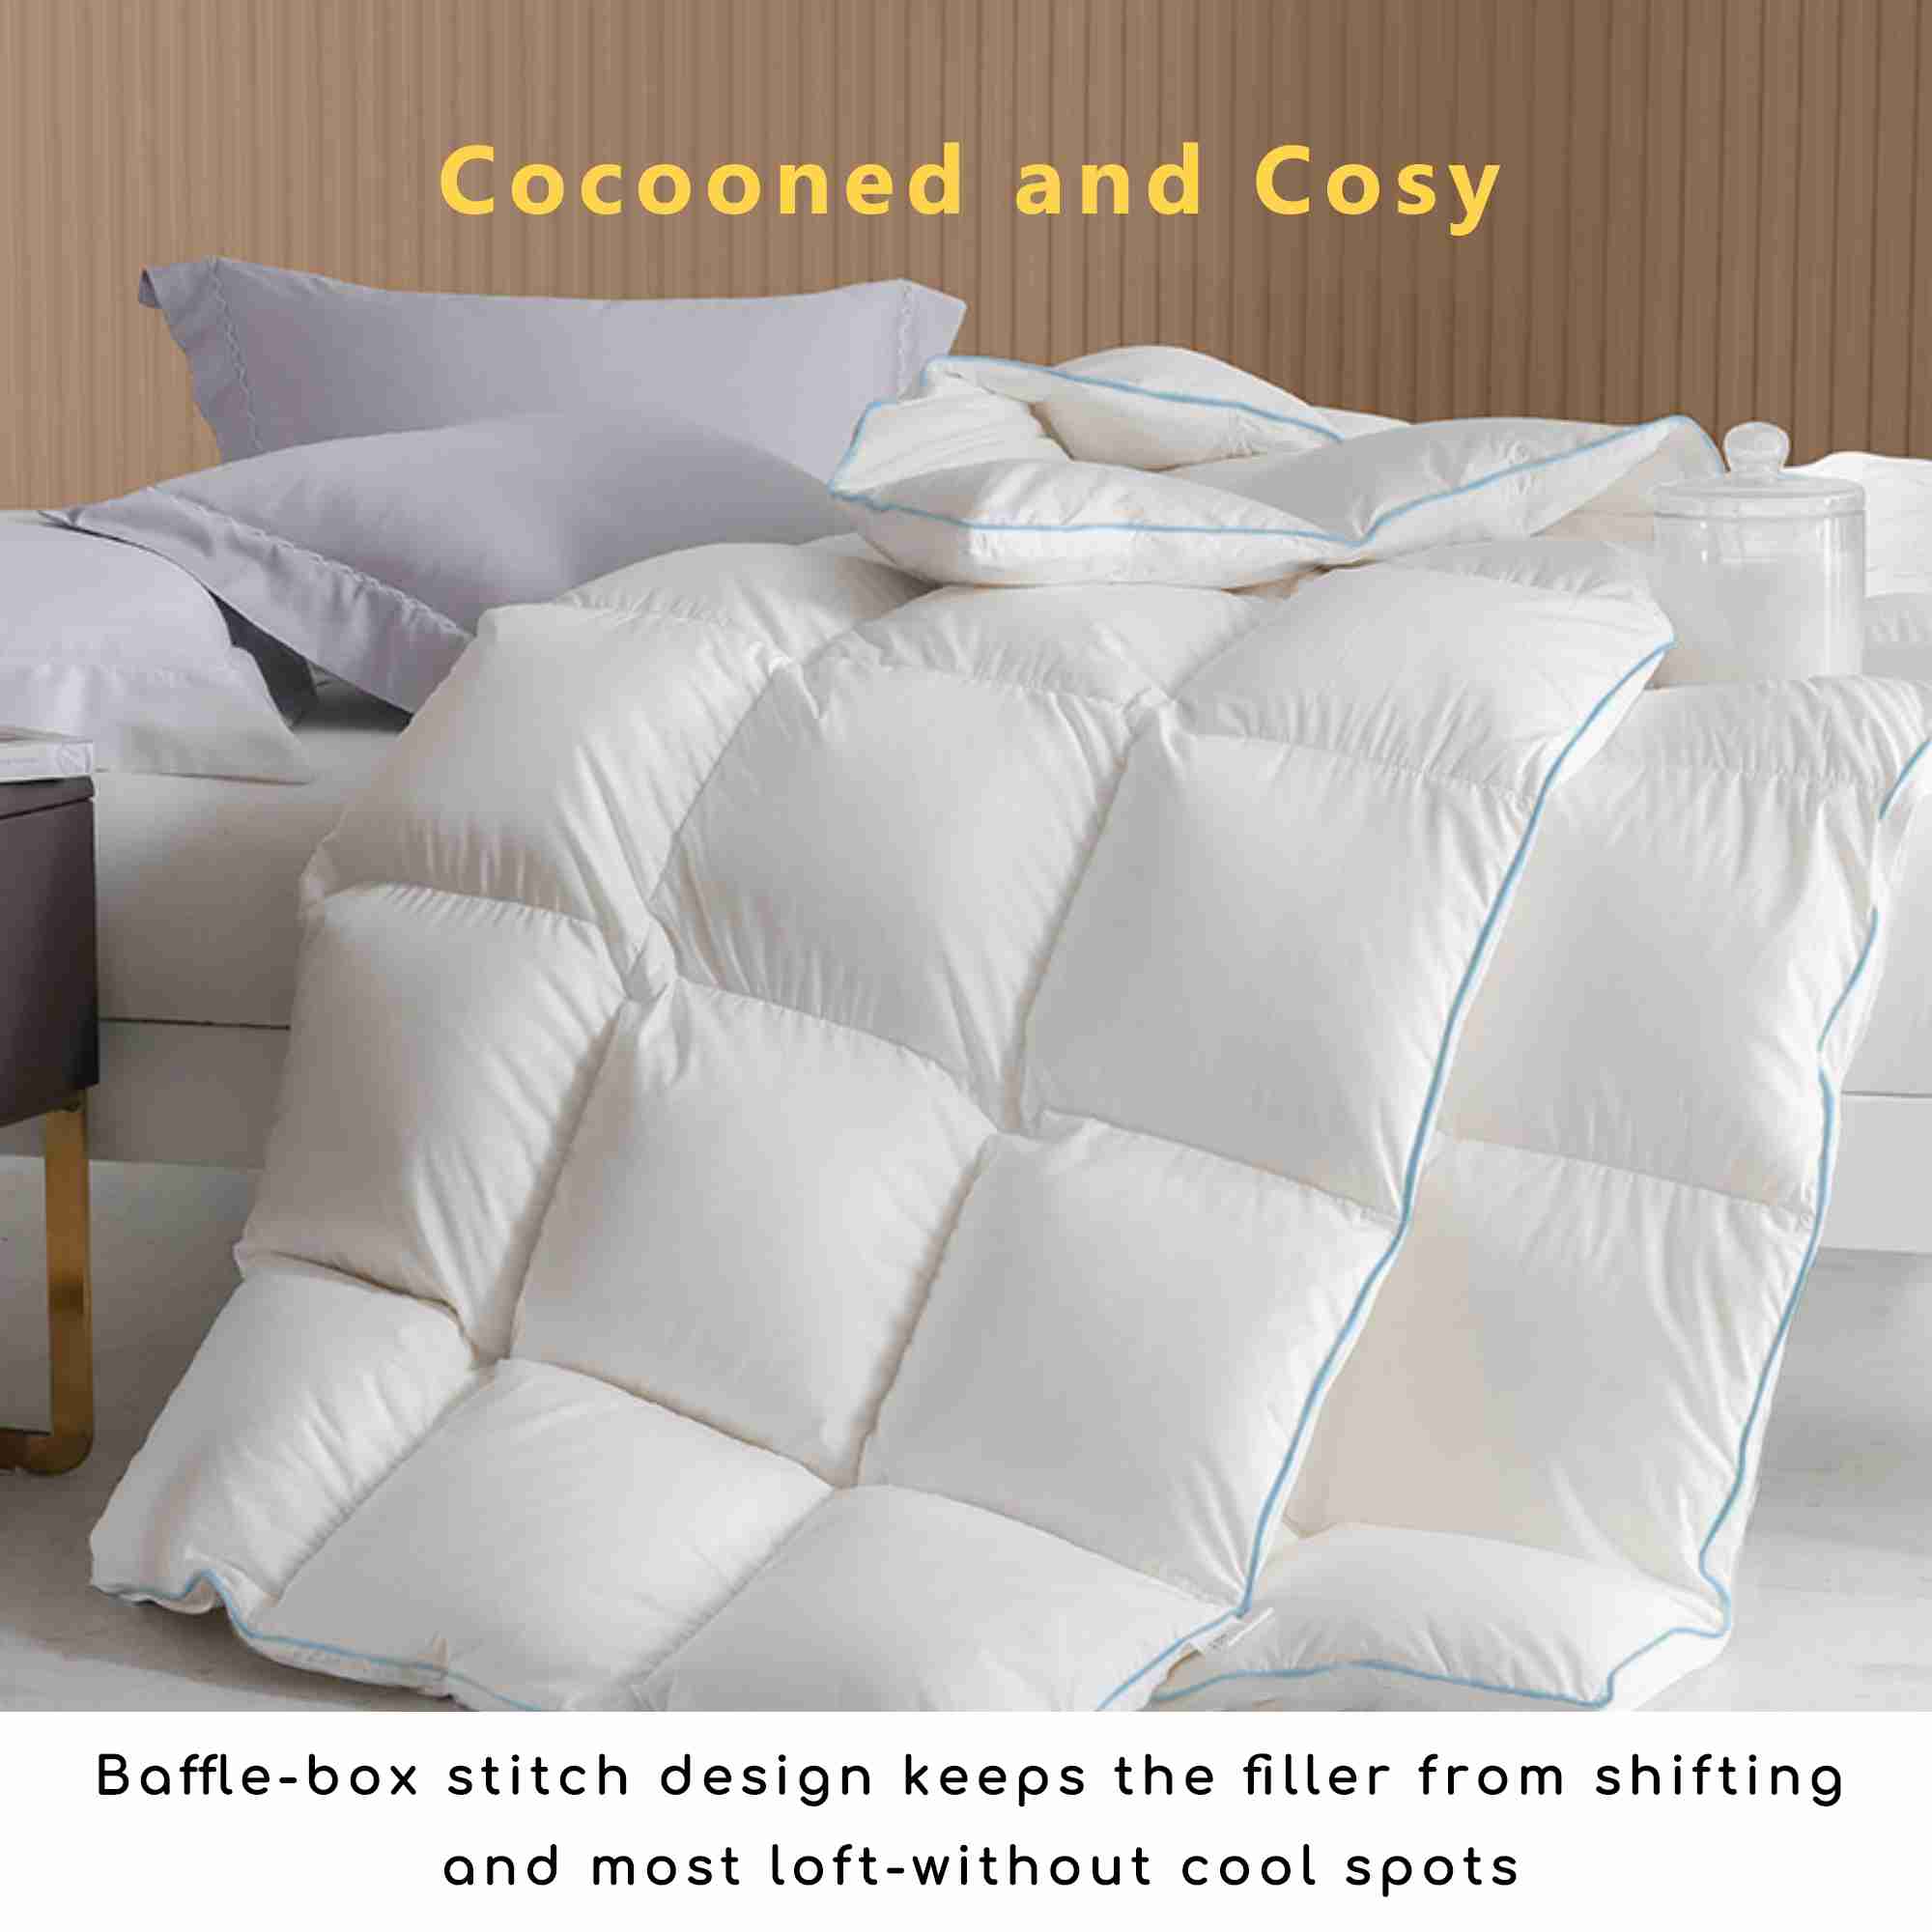 all-season-down-comforter-queen-size-cosy-soft with cash back rebate